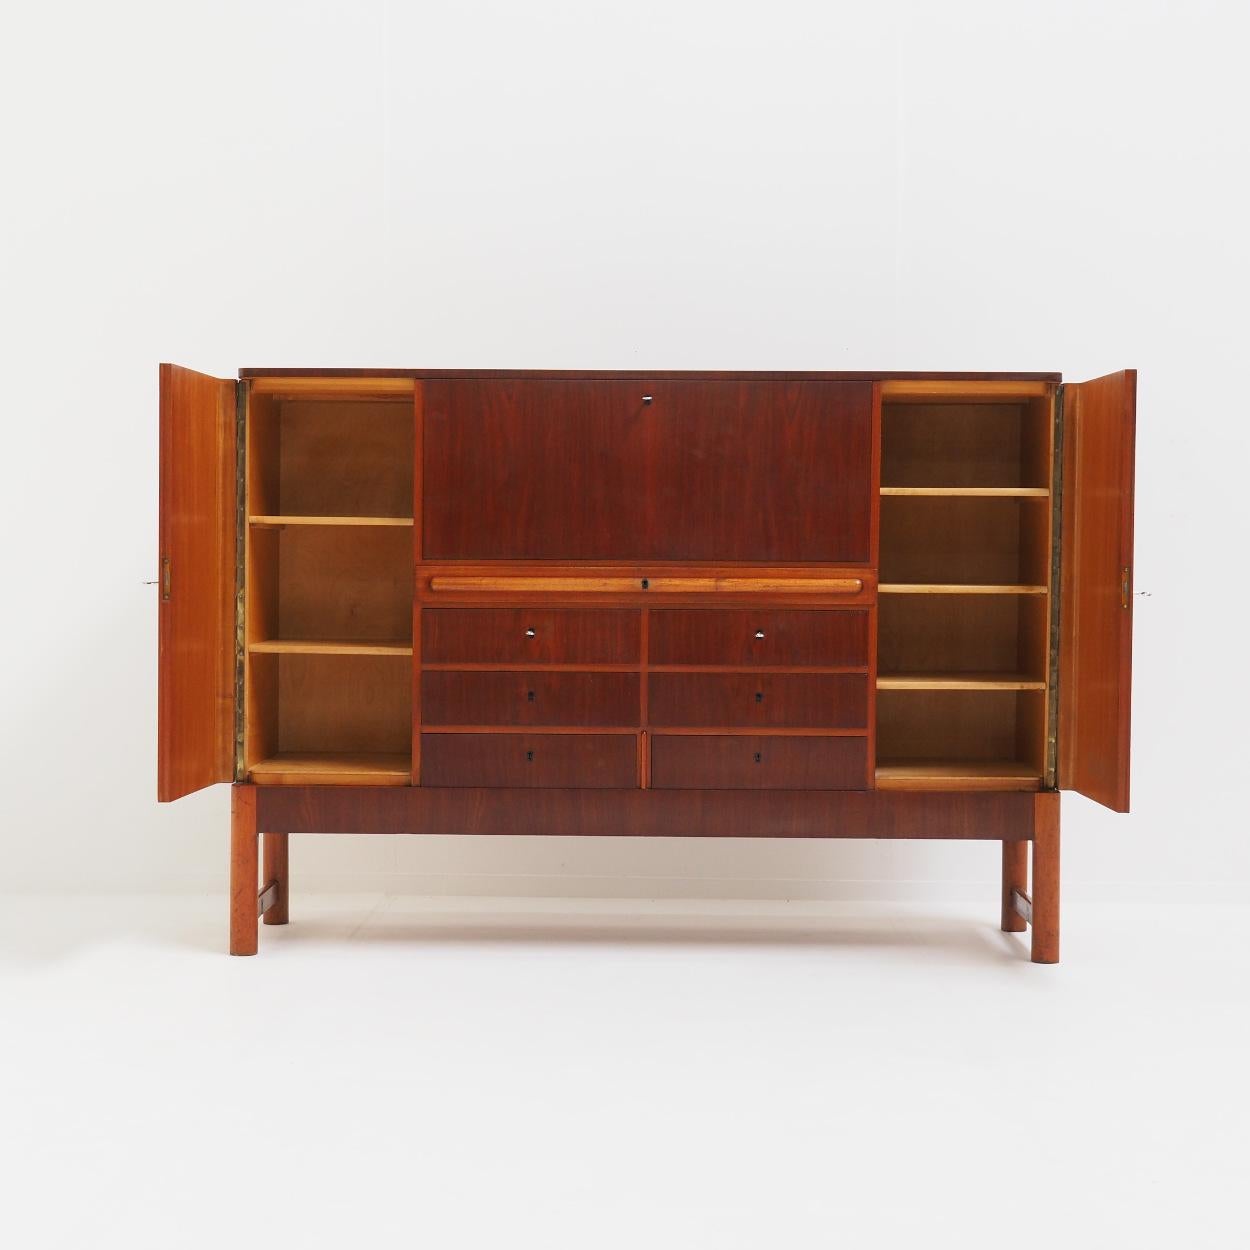 Scandinavian high quality cabinet from the 1960s. Unfortunately I don’t know who the designer or manufacturer is.

The cabinet has a lot of storage space and consists of different types of wood. It has been completely refinished and restored by my